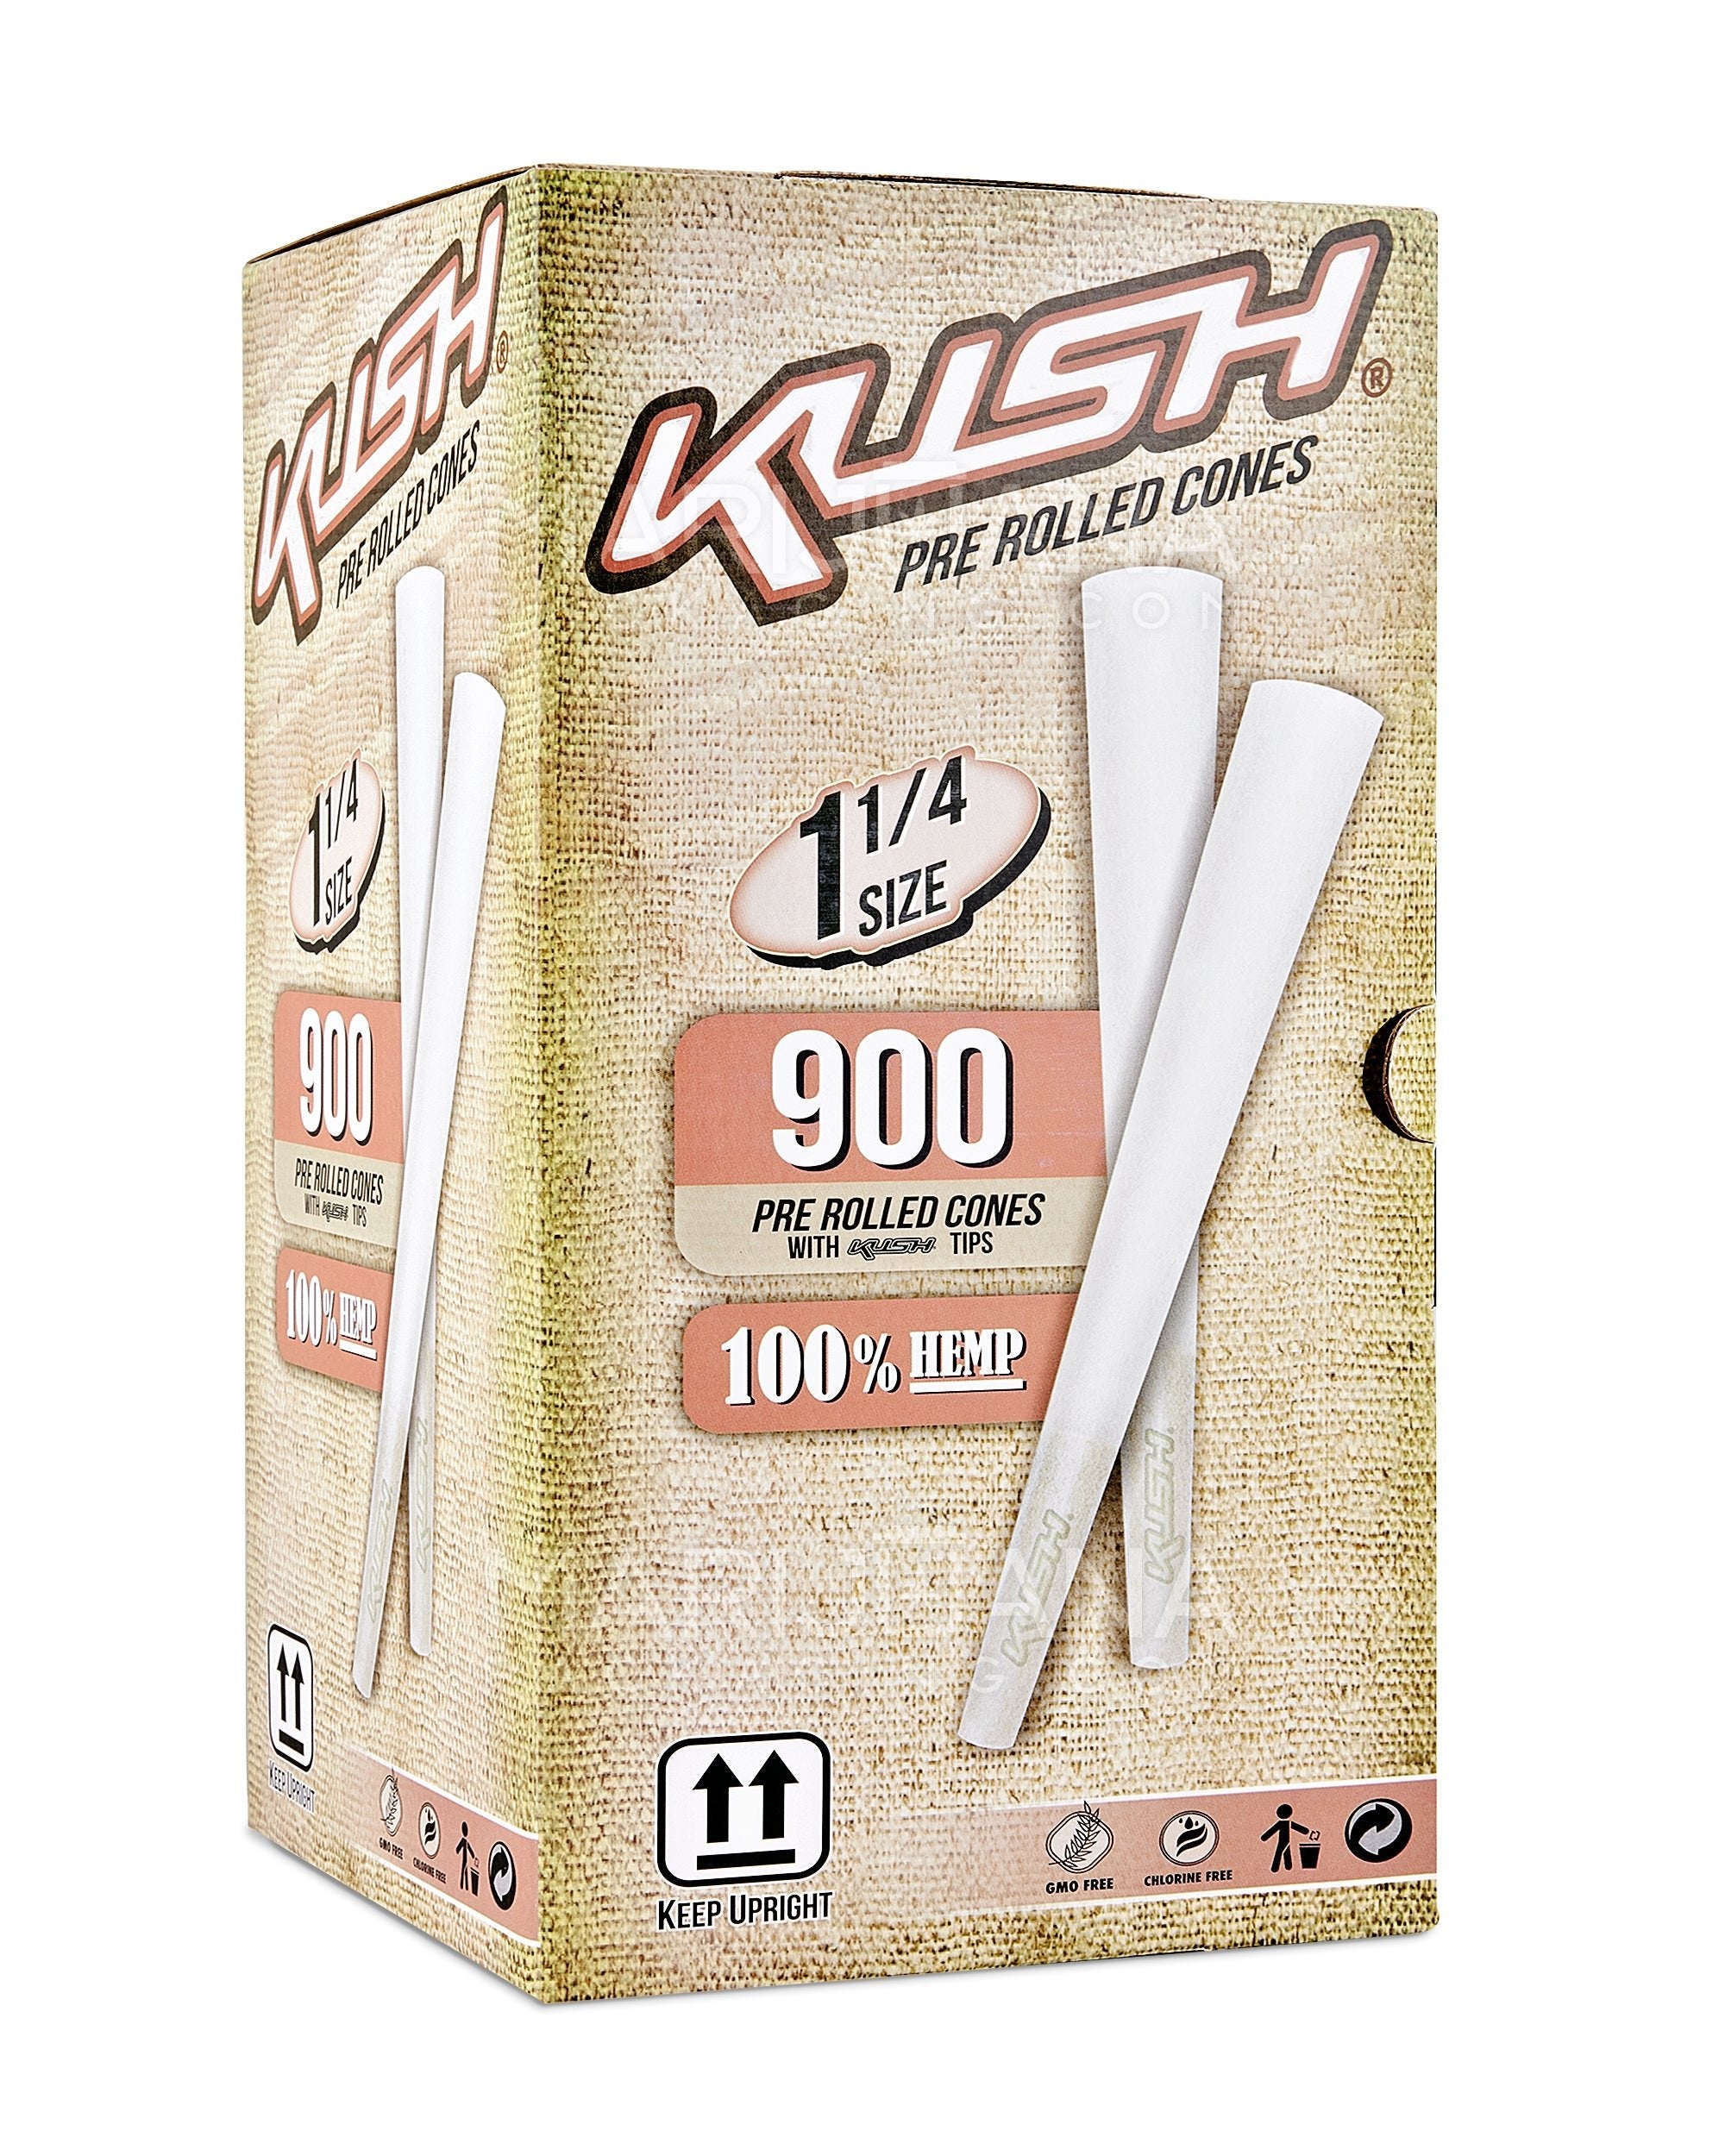 KUSH | Bleached 1 1/4 Size Pre-Rolled Cones w/ Filter Tip | 84mm - Hemp Paper - 900 Count - 1